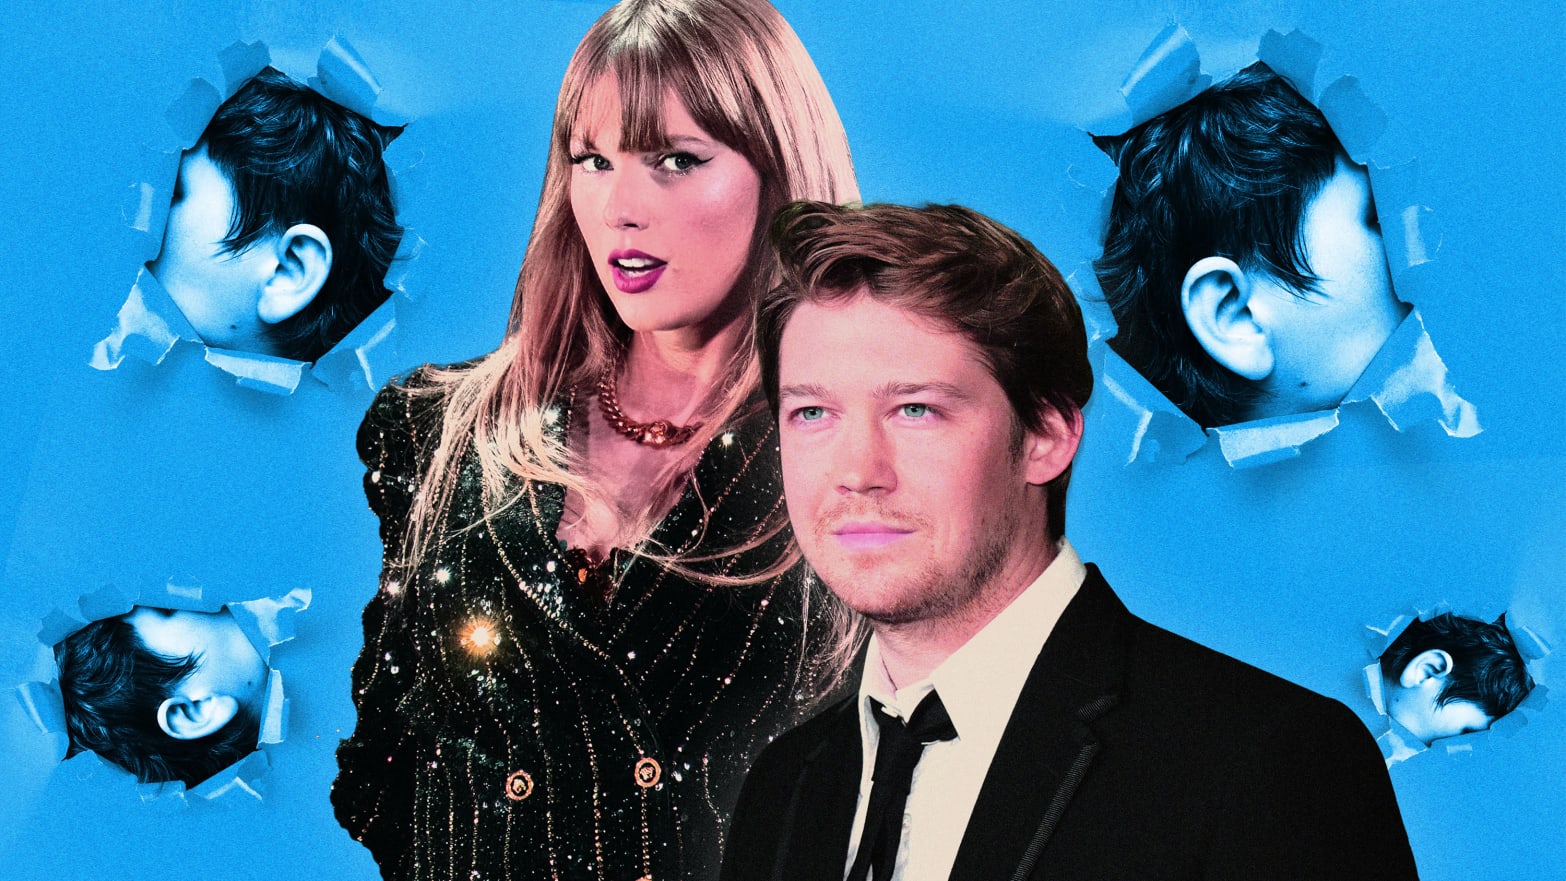 Taylor Swift and Joe Alwyn Reportedly Split After 6 Years As a Couple